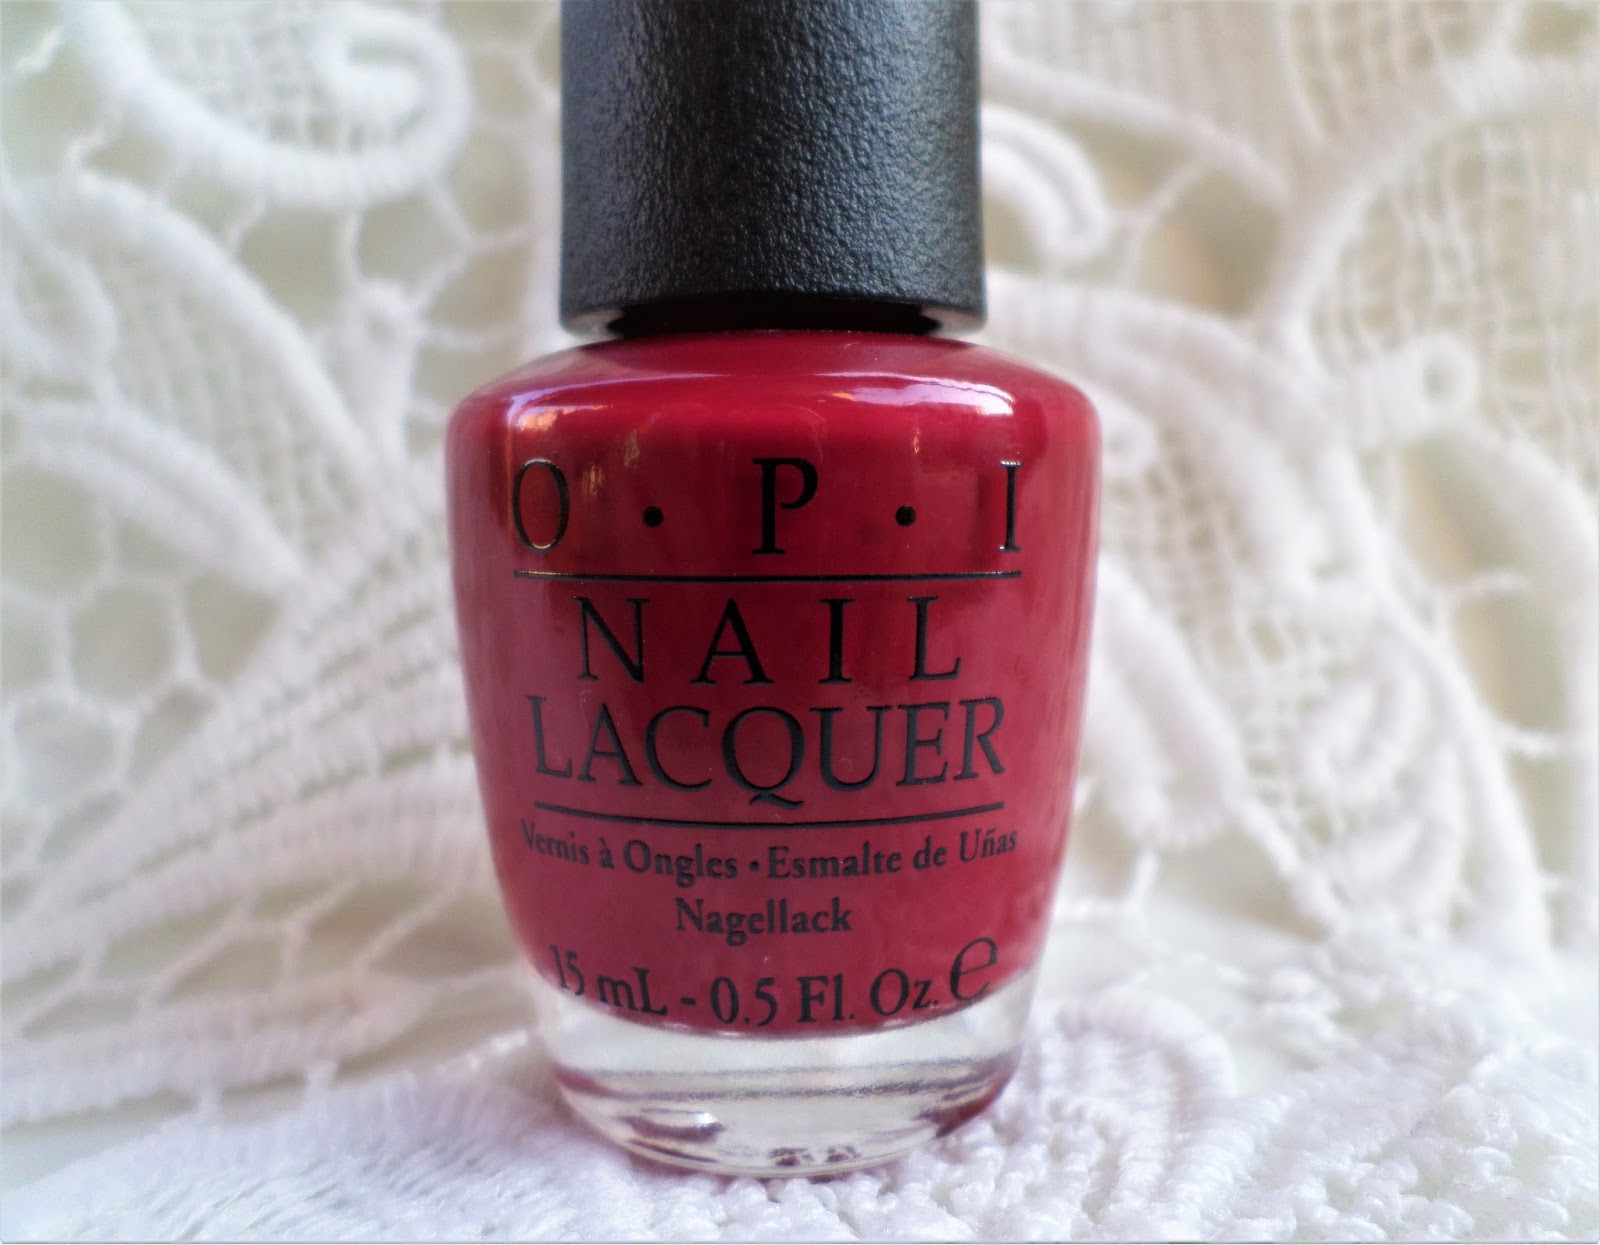 1. OPI Nail Lacquer in "Chick Flick Cherry" - wide 1